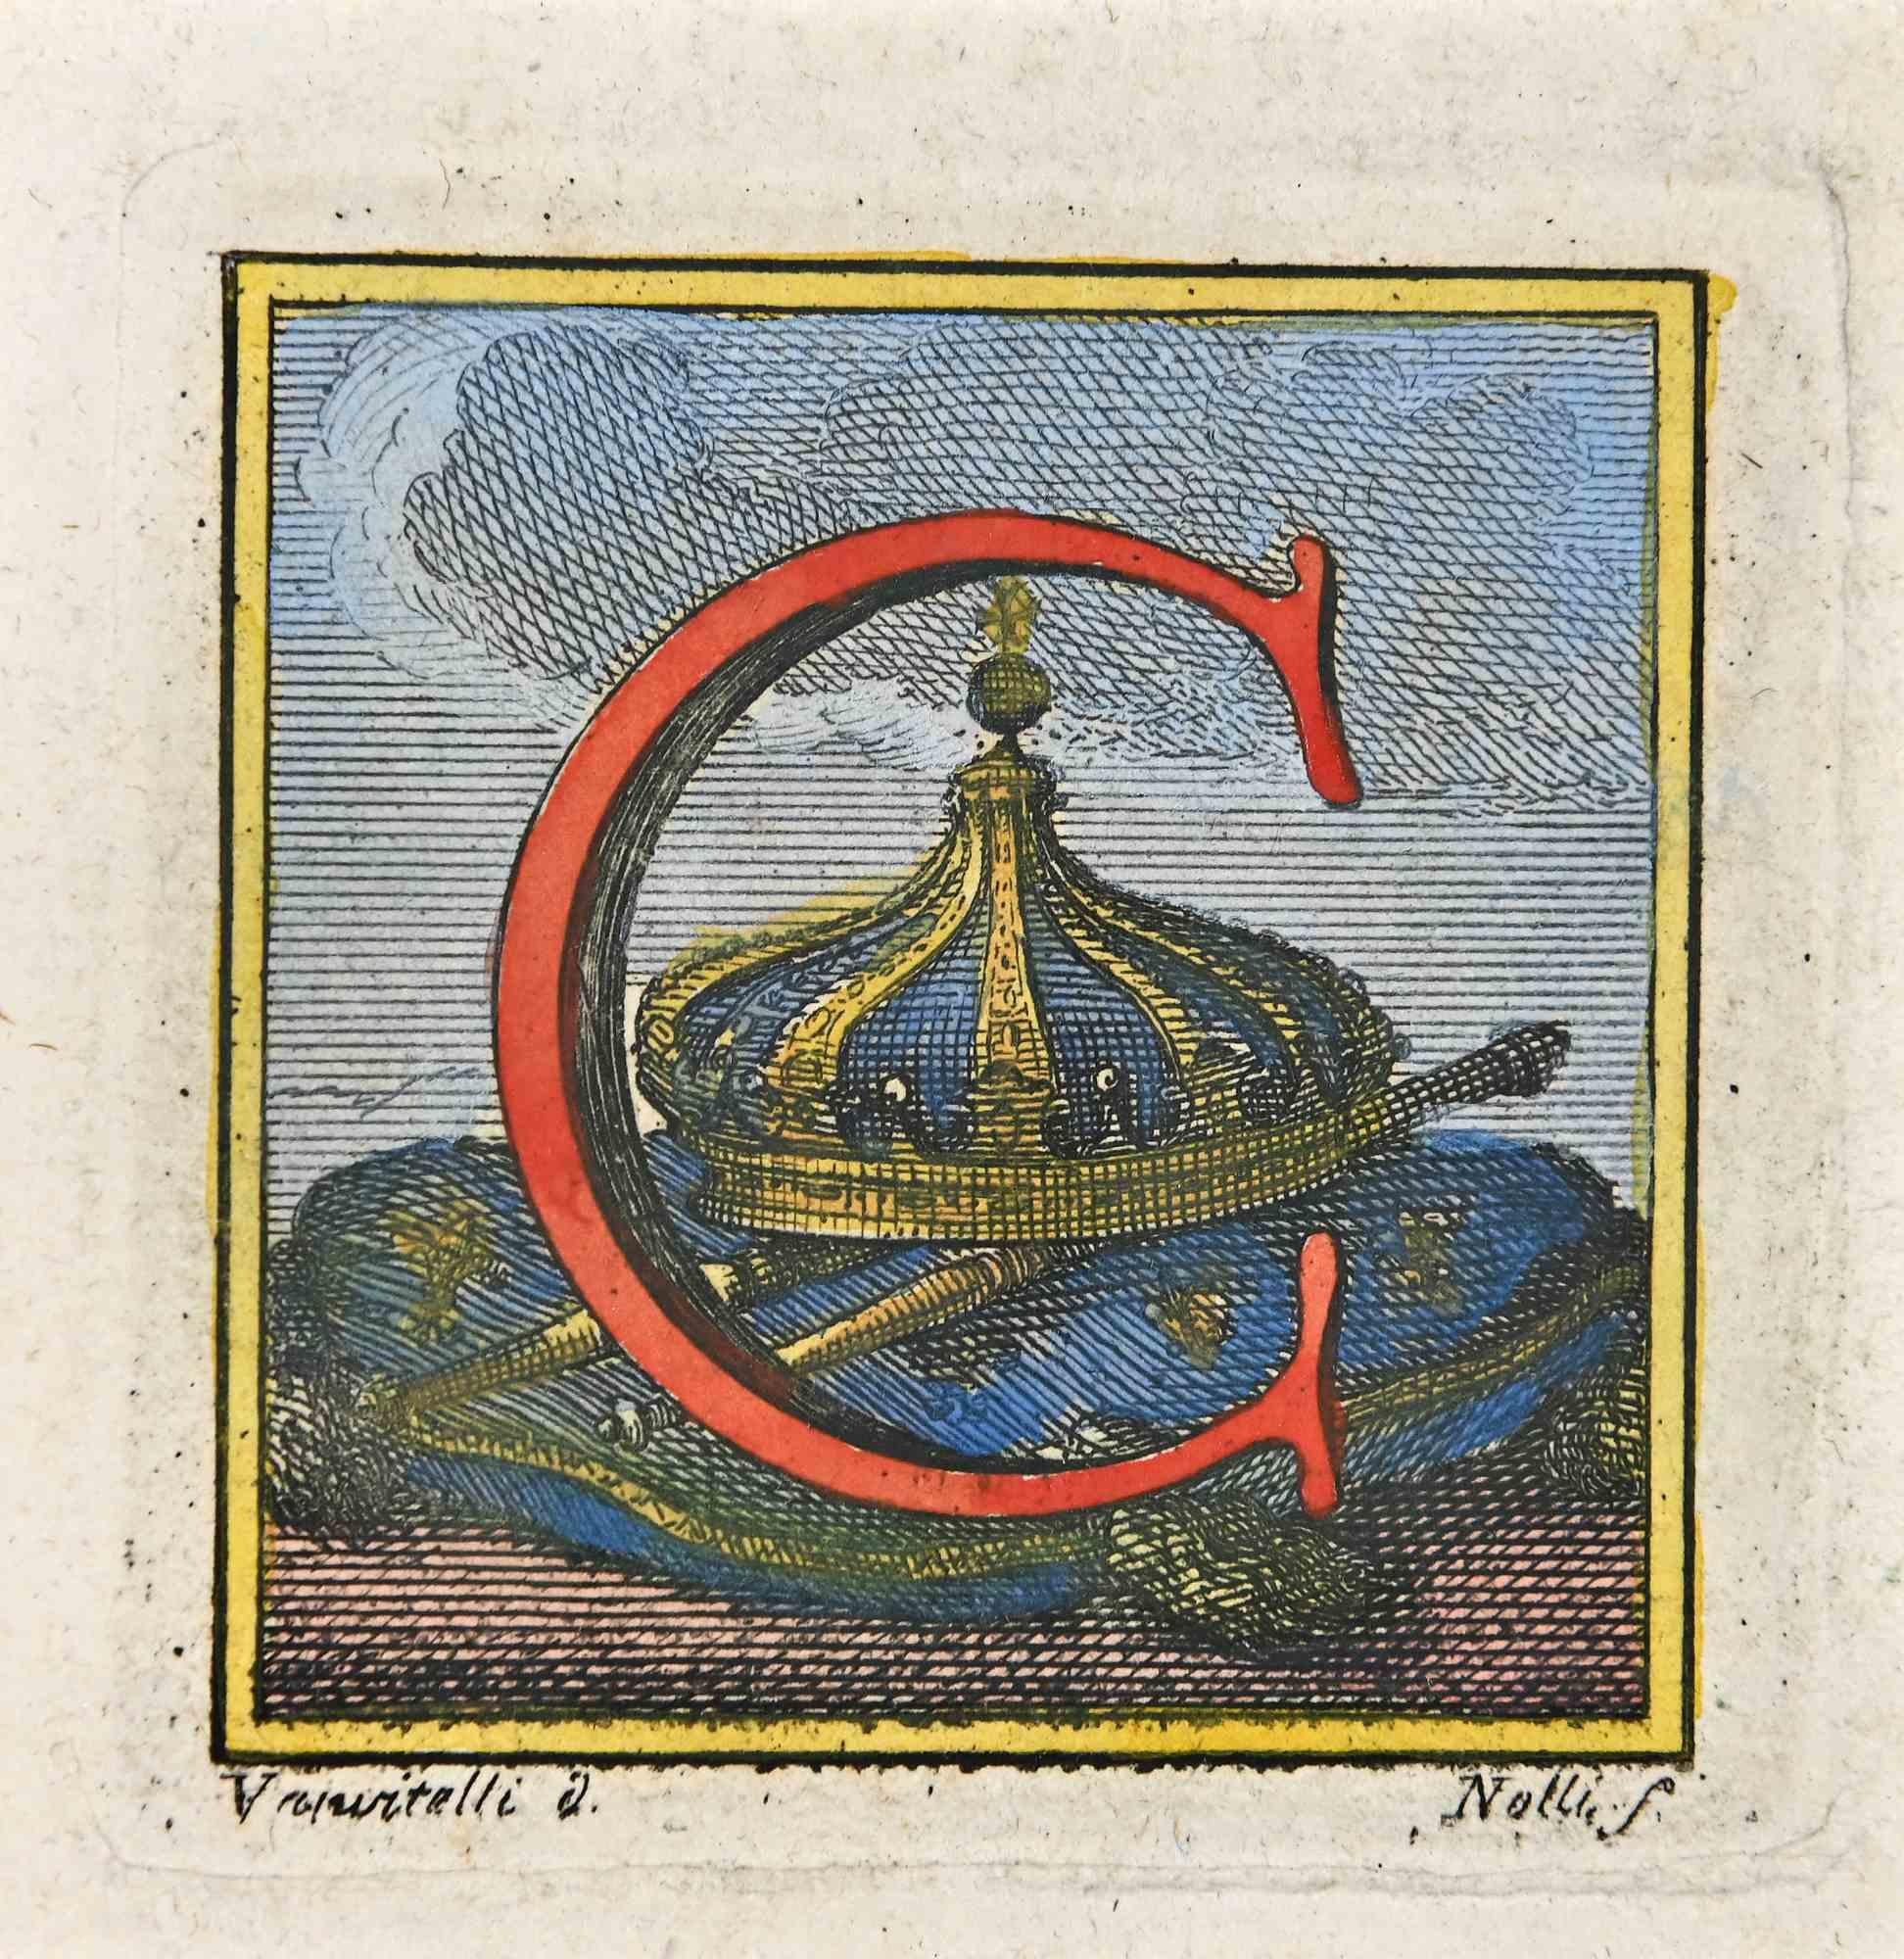 Letter of the Alphabet C  from the series "Antiquities of Herculaneum", is an etching on paper realized by Luigi Vanvitelli in the 18th century.

Signed on the plate.

Good conditions.

The etching belongs to the print suite “Antiquities of